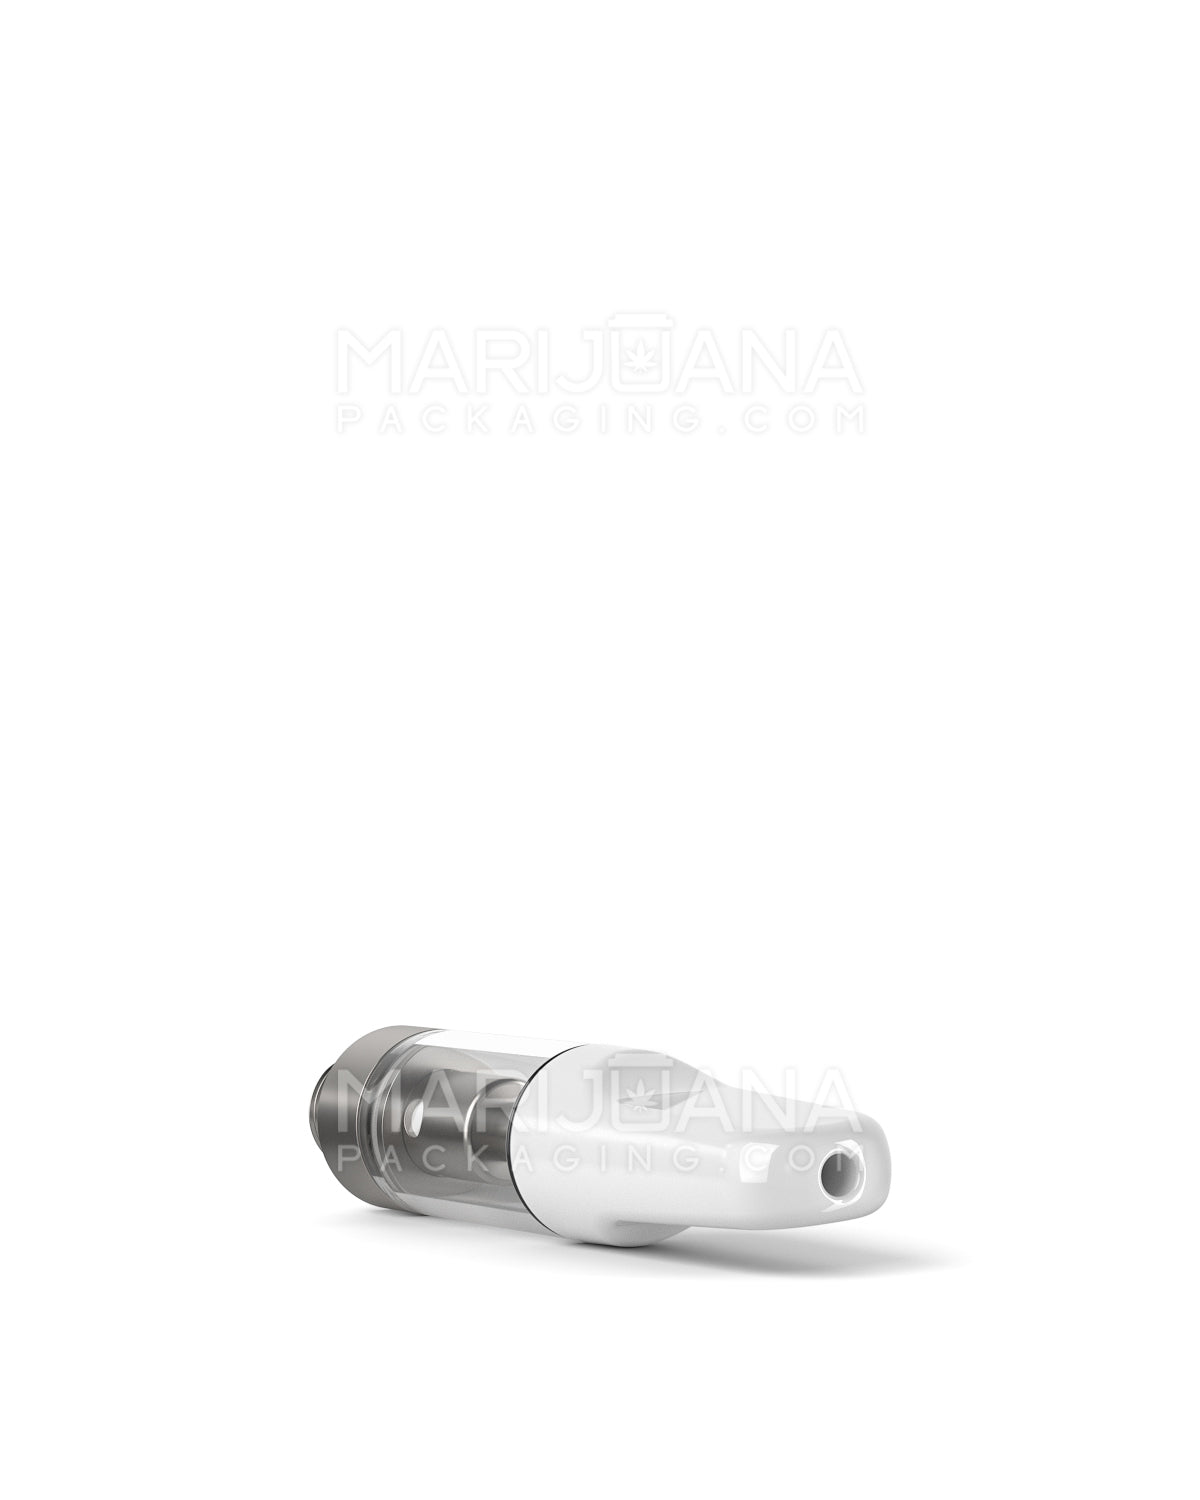 CCELL | Liquid6 Reactor Glass Vape Cartridge with White Ceramic Mouthpiece | 0.5mL - Screw On - 100 Count - 6